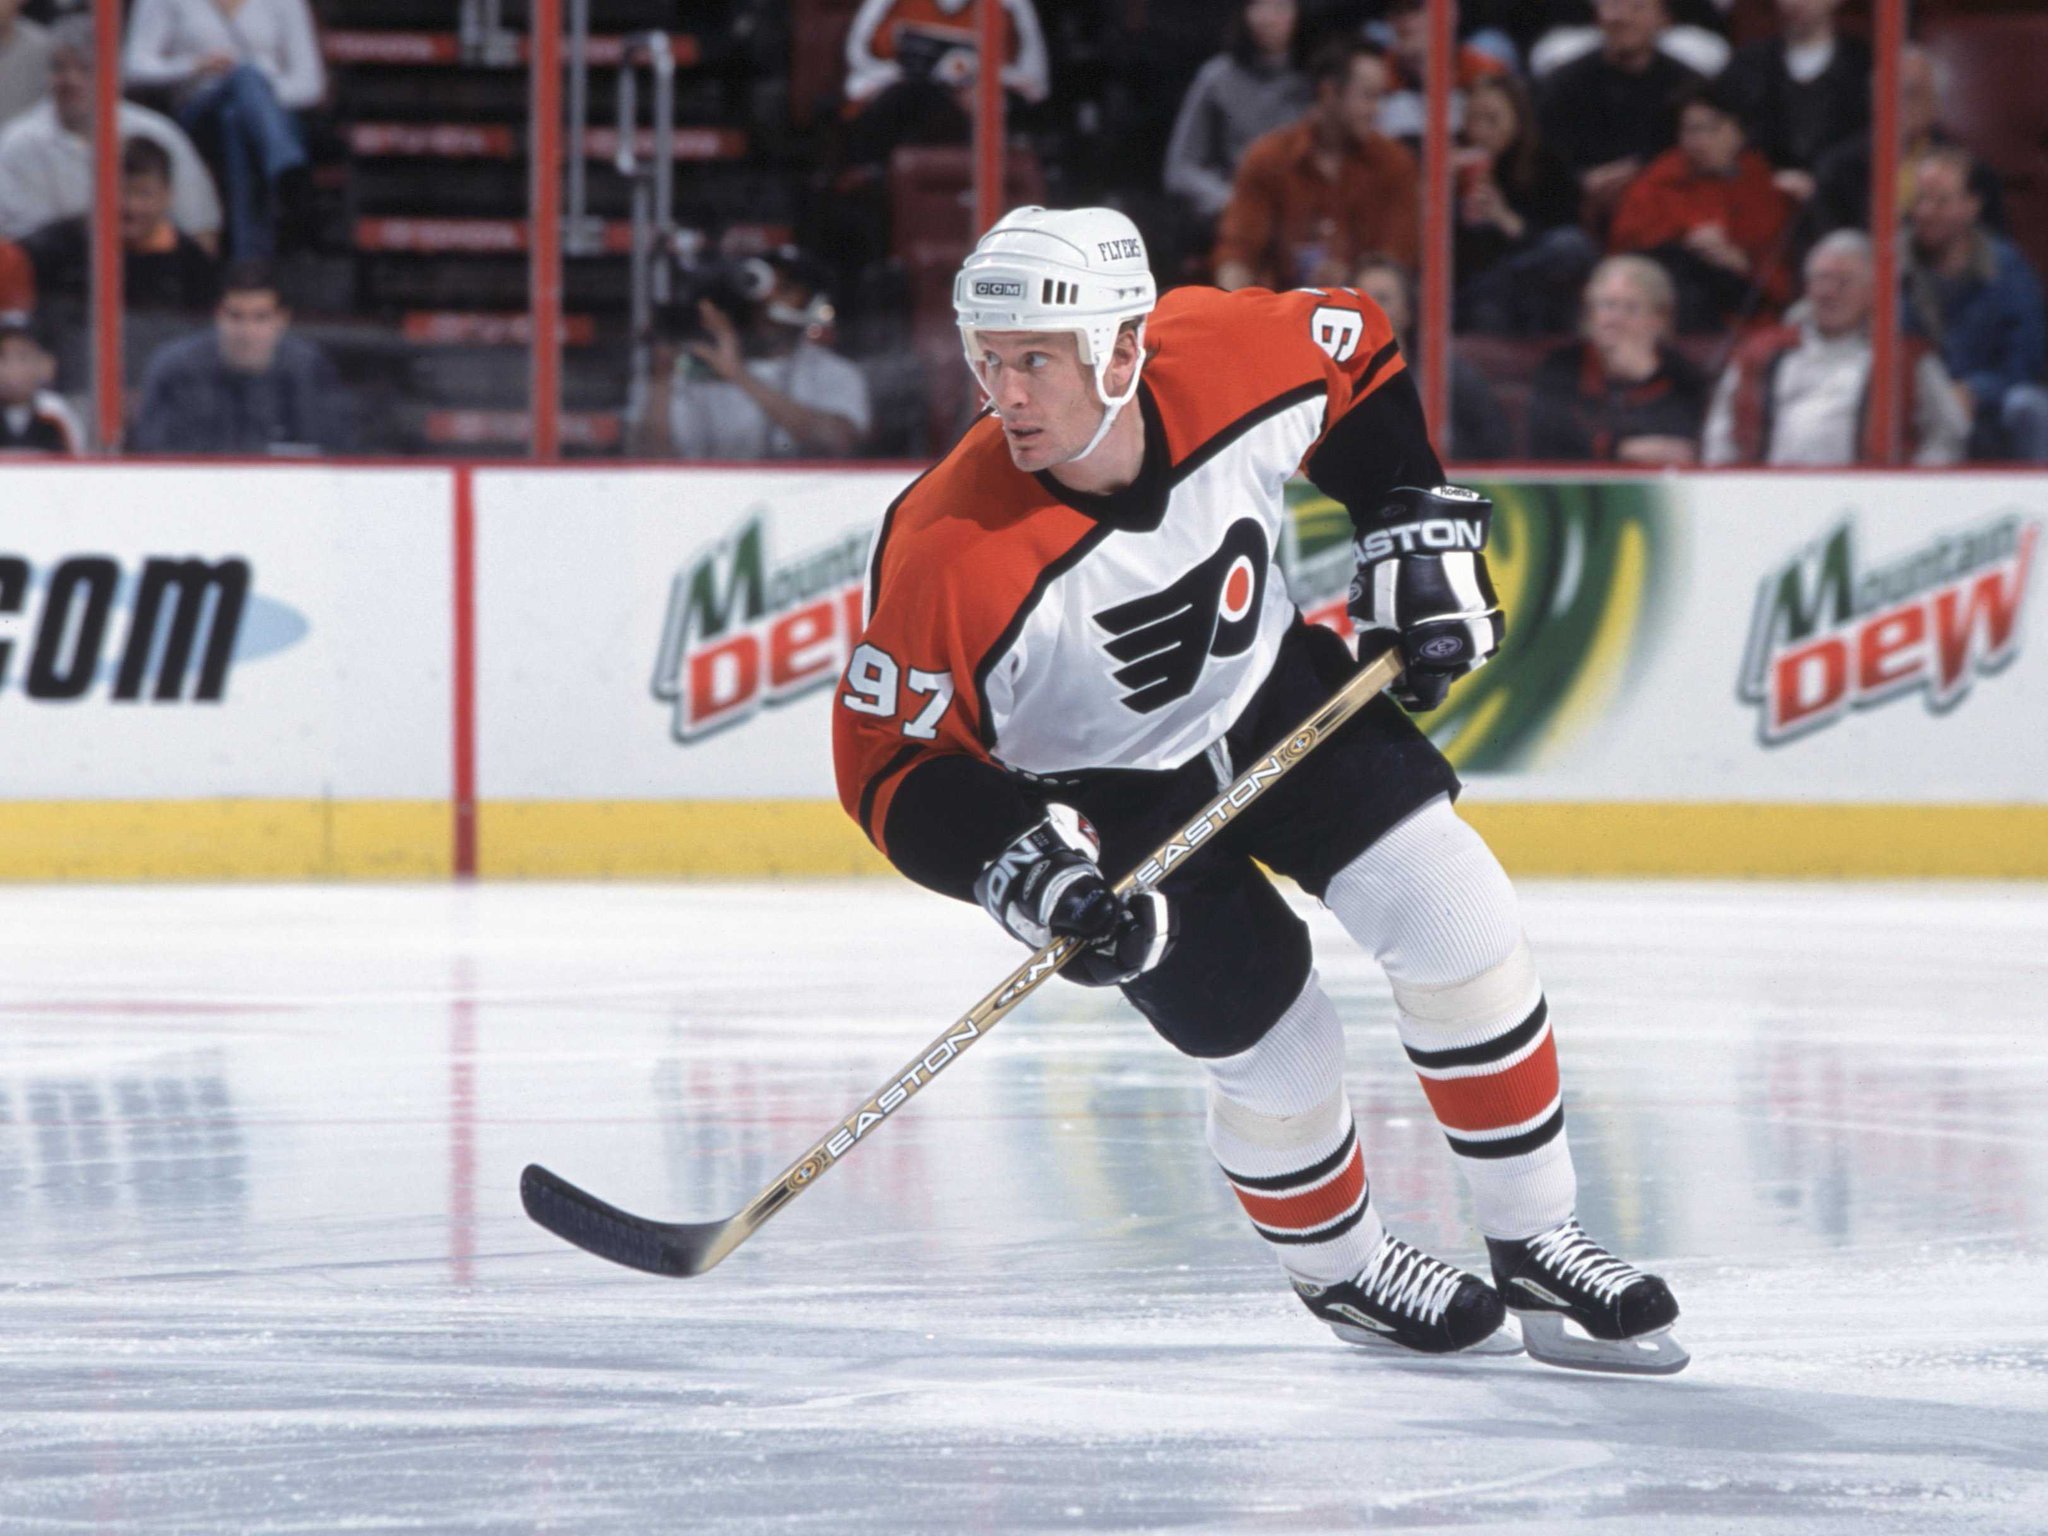 Happy Birthday to Jeremy Roenick, who turns 47 today! 